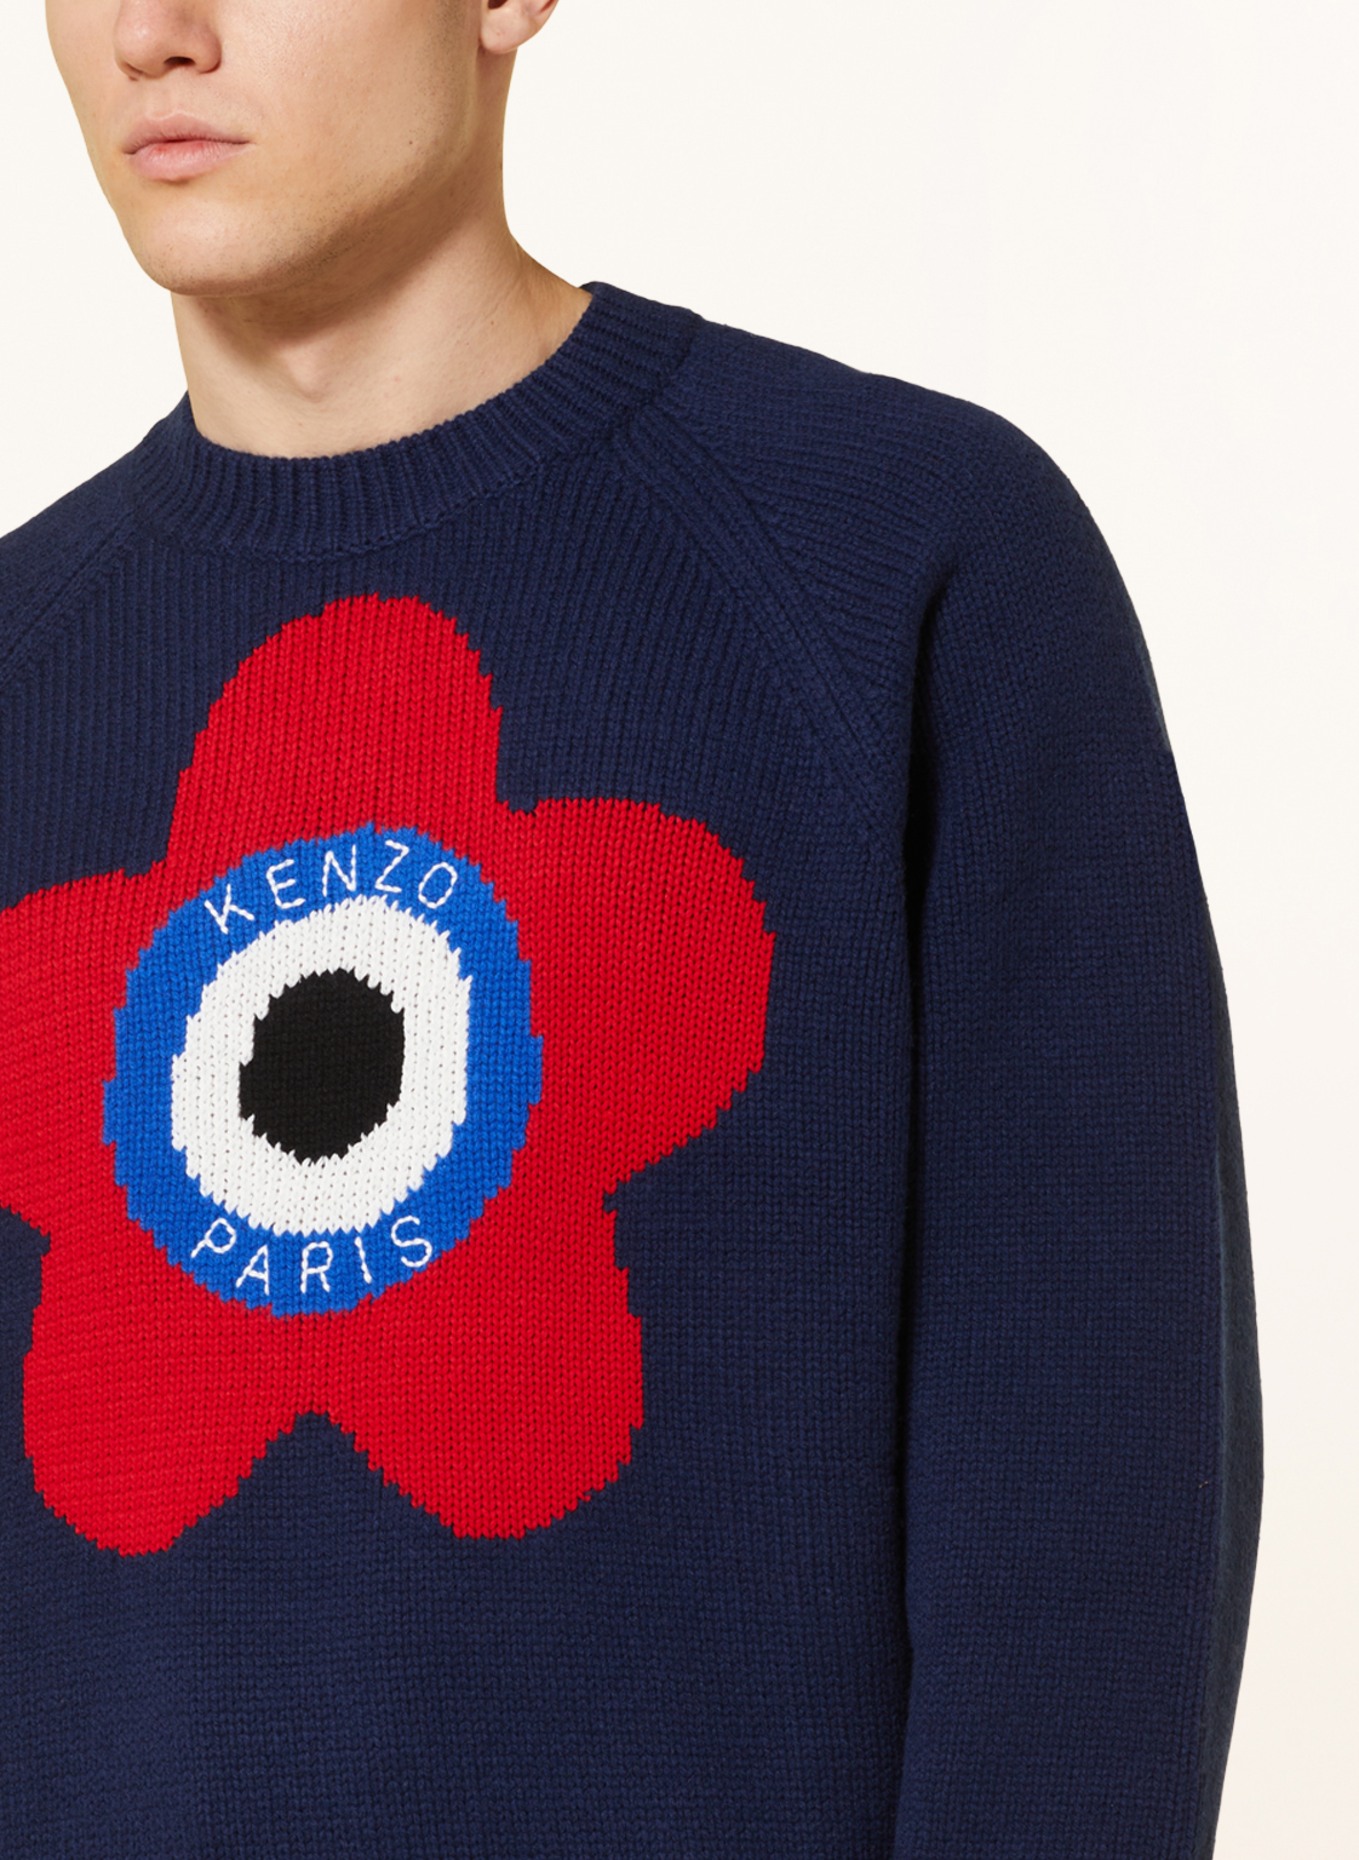 KENZO Sweater, Color: DARK BLUE/ RED (Image 4)